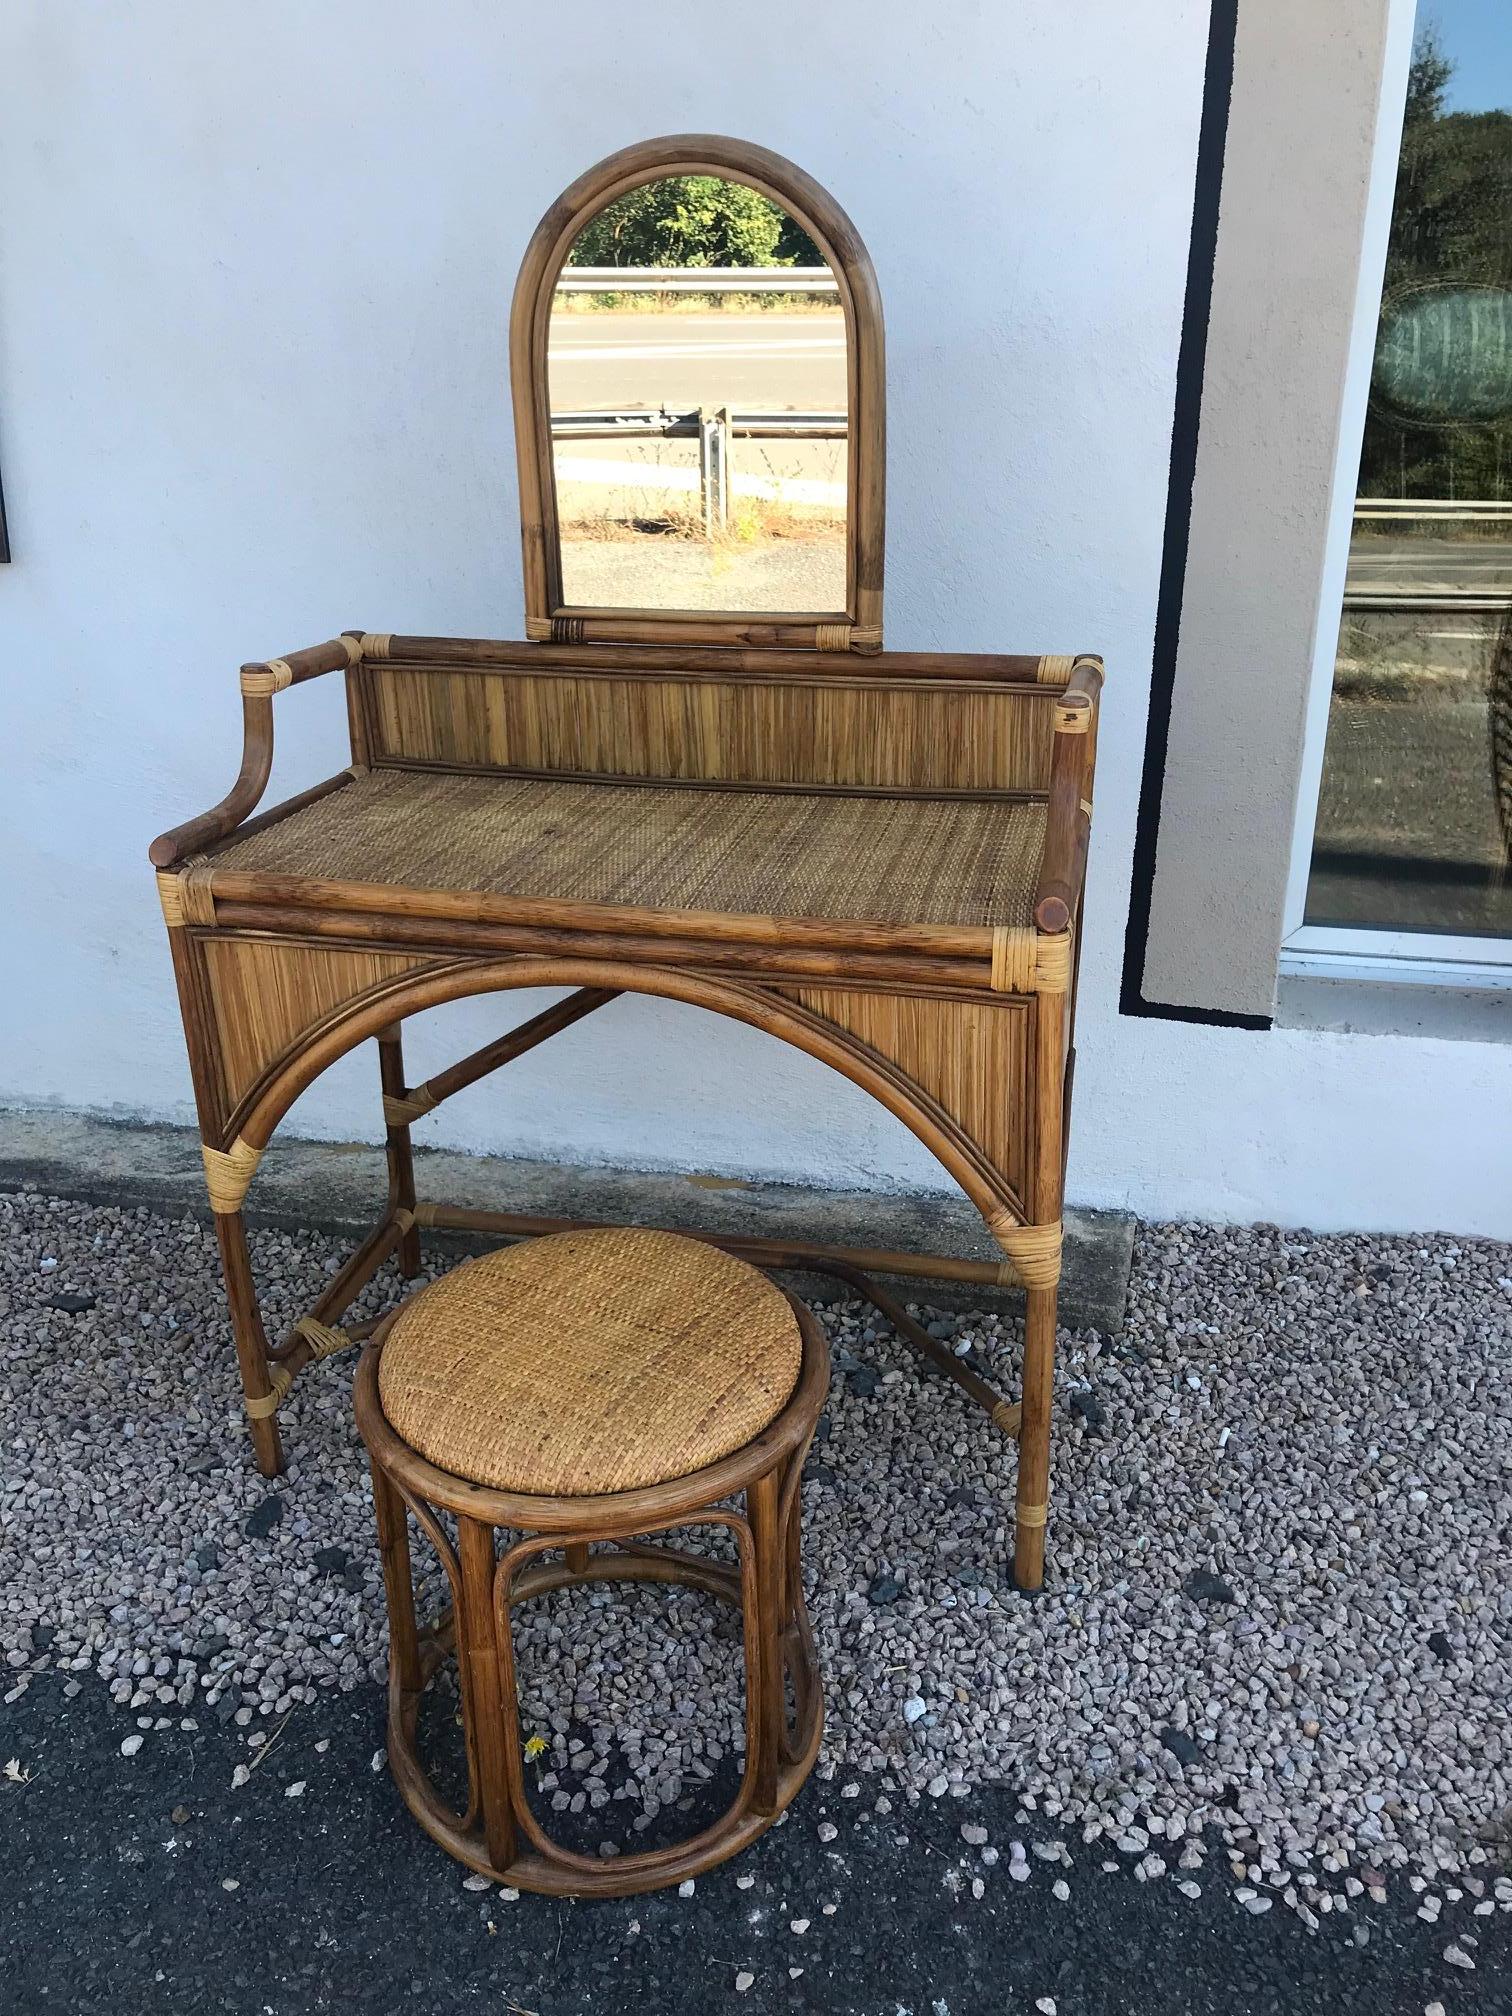 Very nice 20th century French Rattan dressing table and its stool from the 1960s. 
The mirror could be removable. Very good condition and quality.